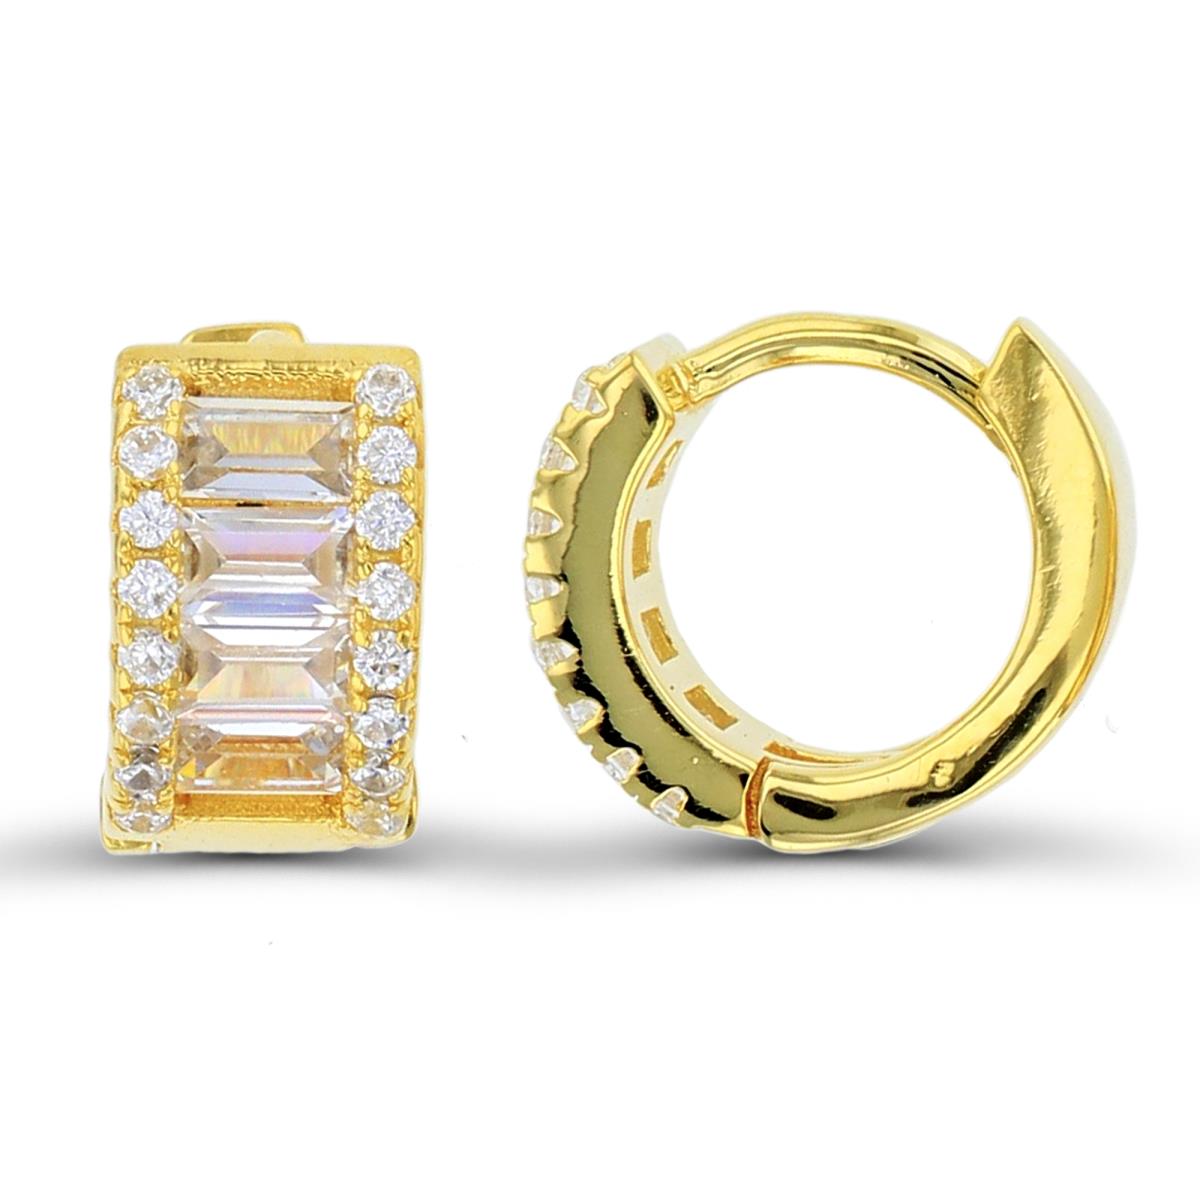 Sterling Silver 1M Yellow 3.5x2mm SB White CZ Center Row & Rnd White CZ on Side 10x5.5mm Huggie Earrings